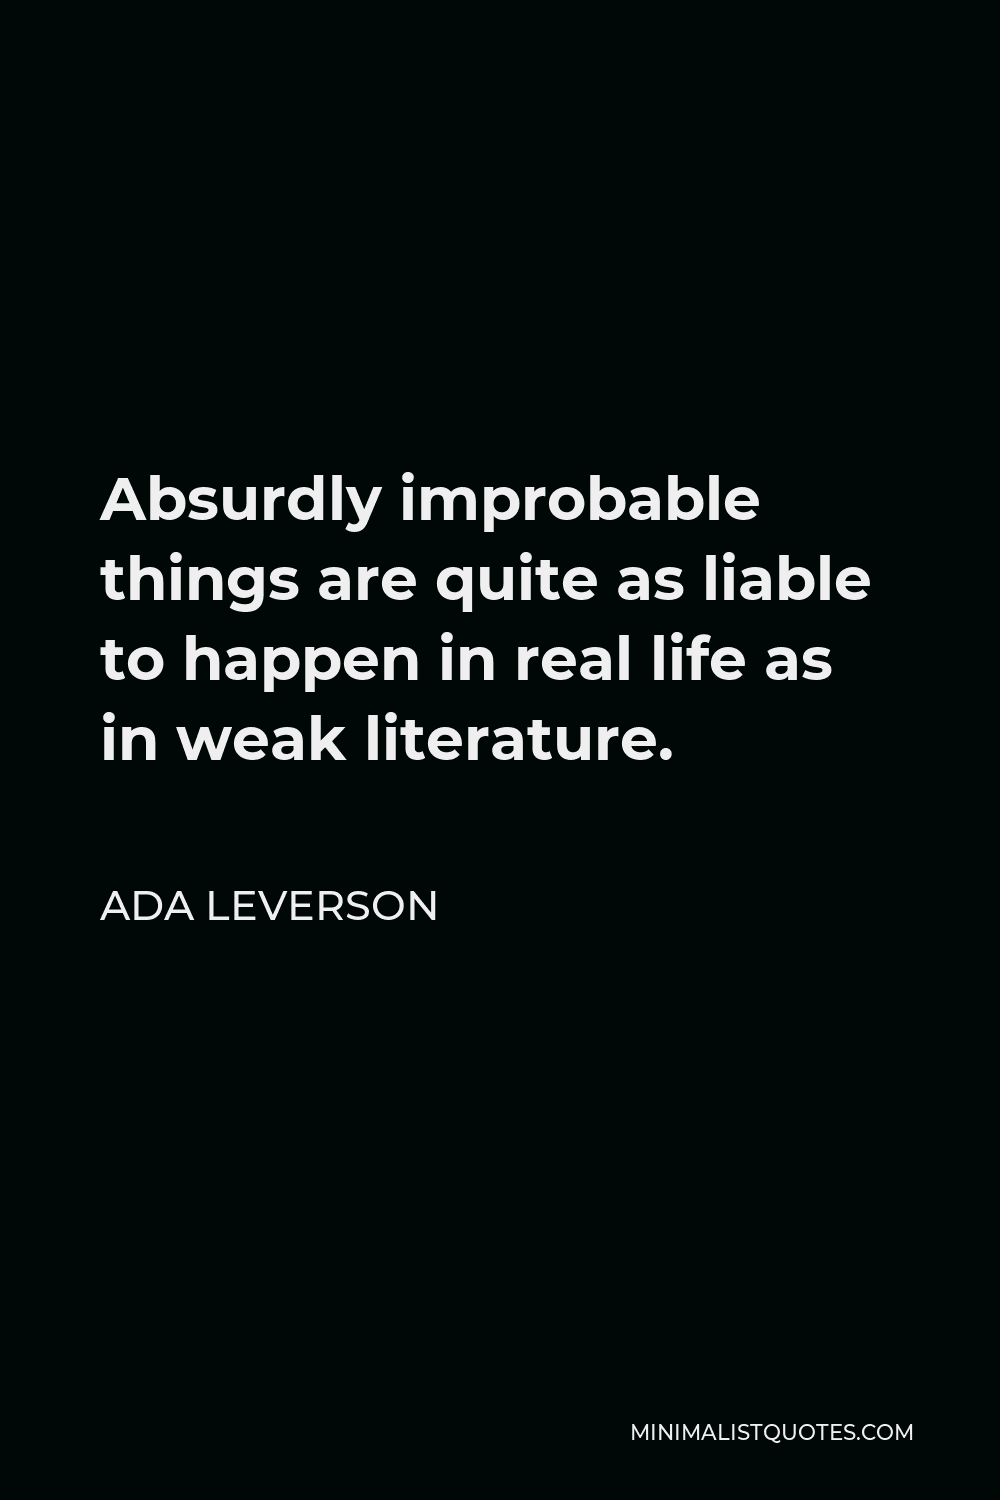 Ada Leverson Quote - Absurdly improbable things are quite as liable to happen in real life as in weak literature.